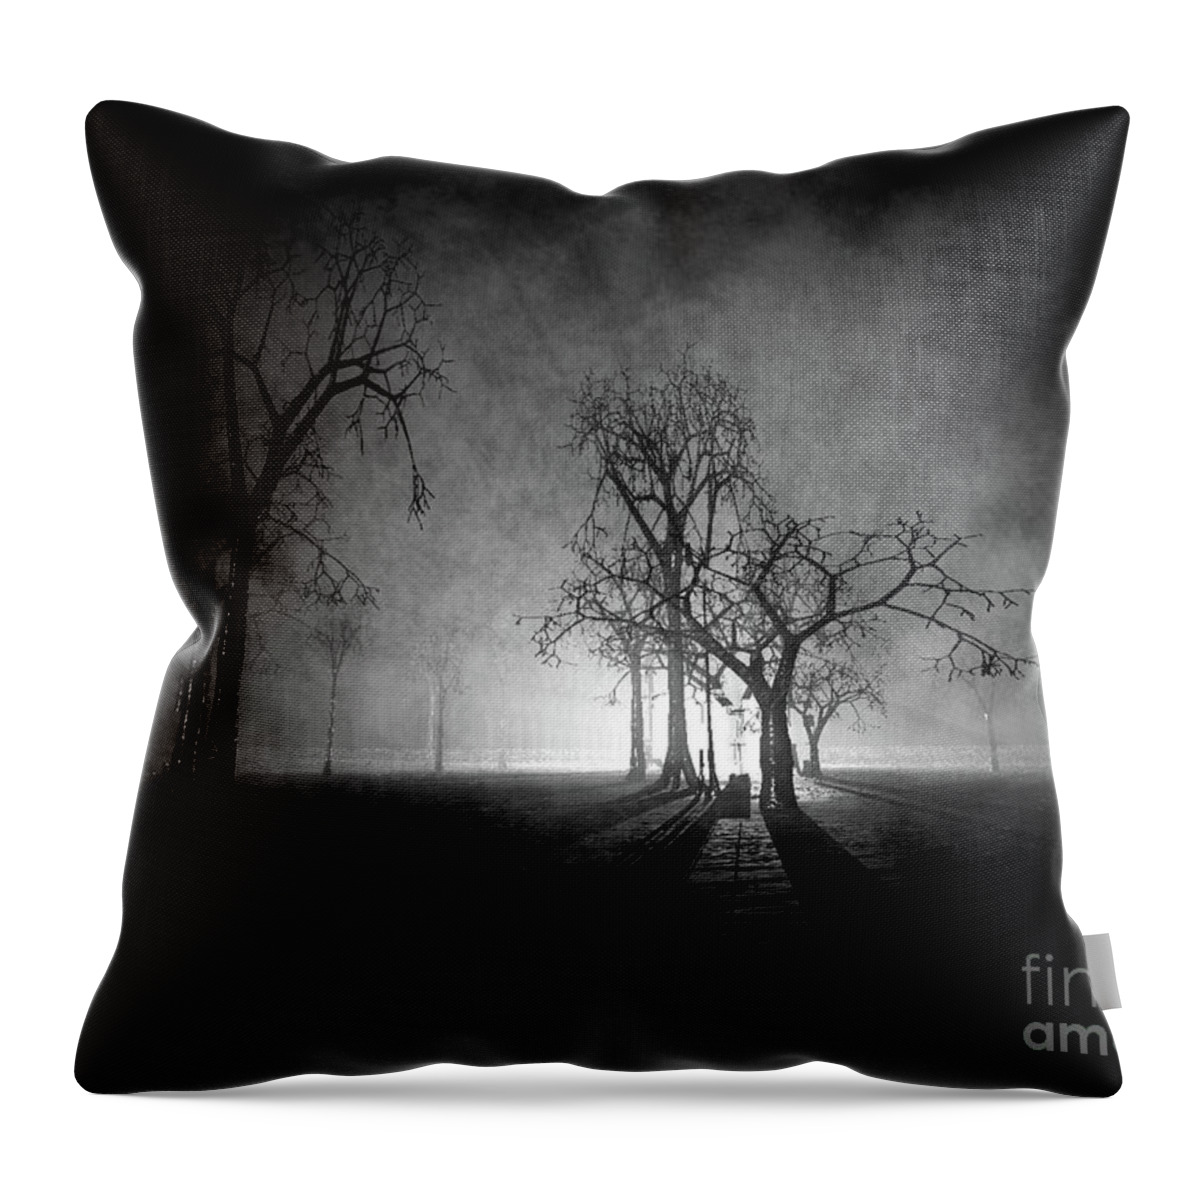 Alien Life Form Throw Pillow featuring the digital art We Are Not Alone by Phil Perkins